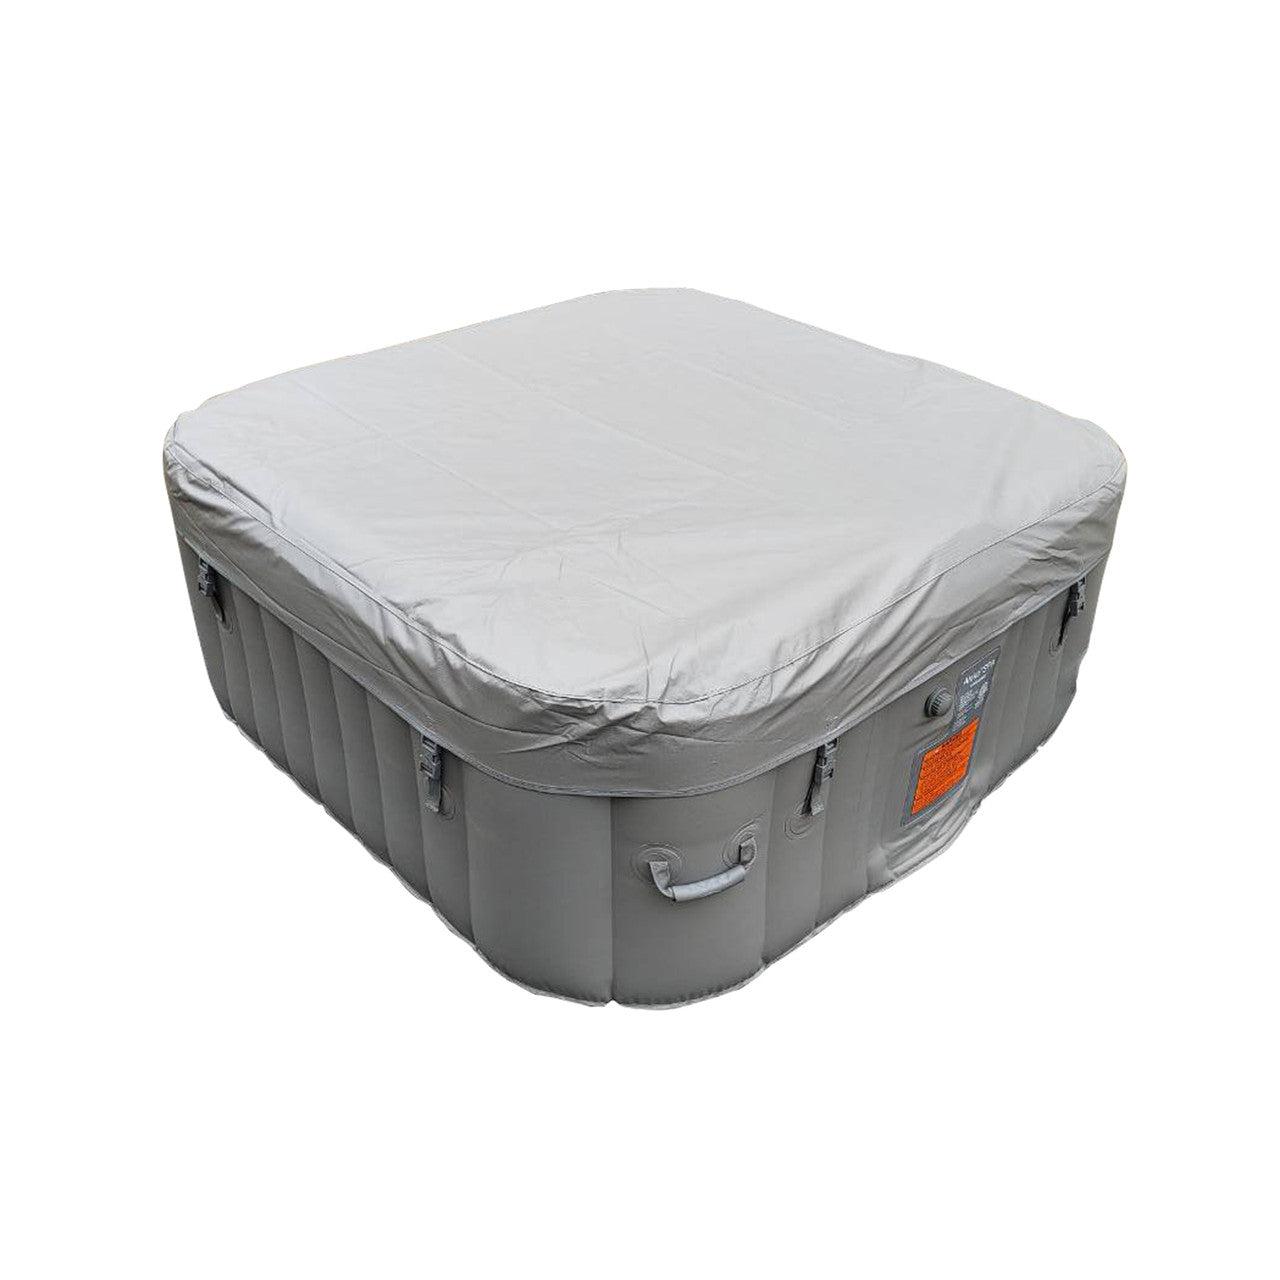 ALEKO 4 Person Gray 160 Gallon Square Inflatable Jetted Hot Tub with Cover - Purely Relaxation